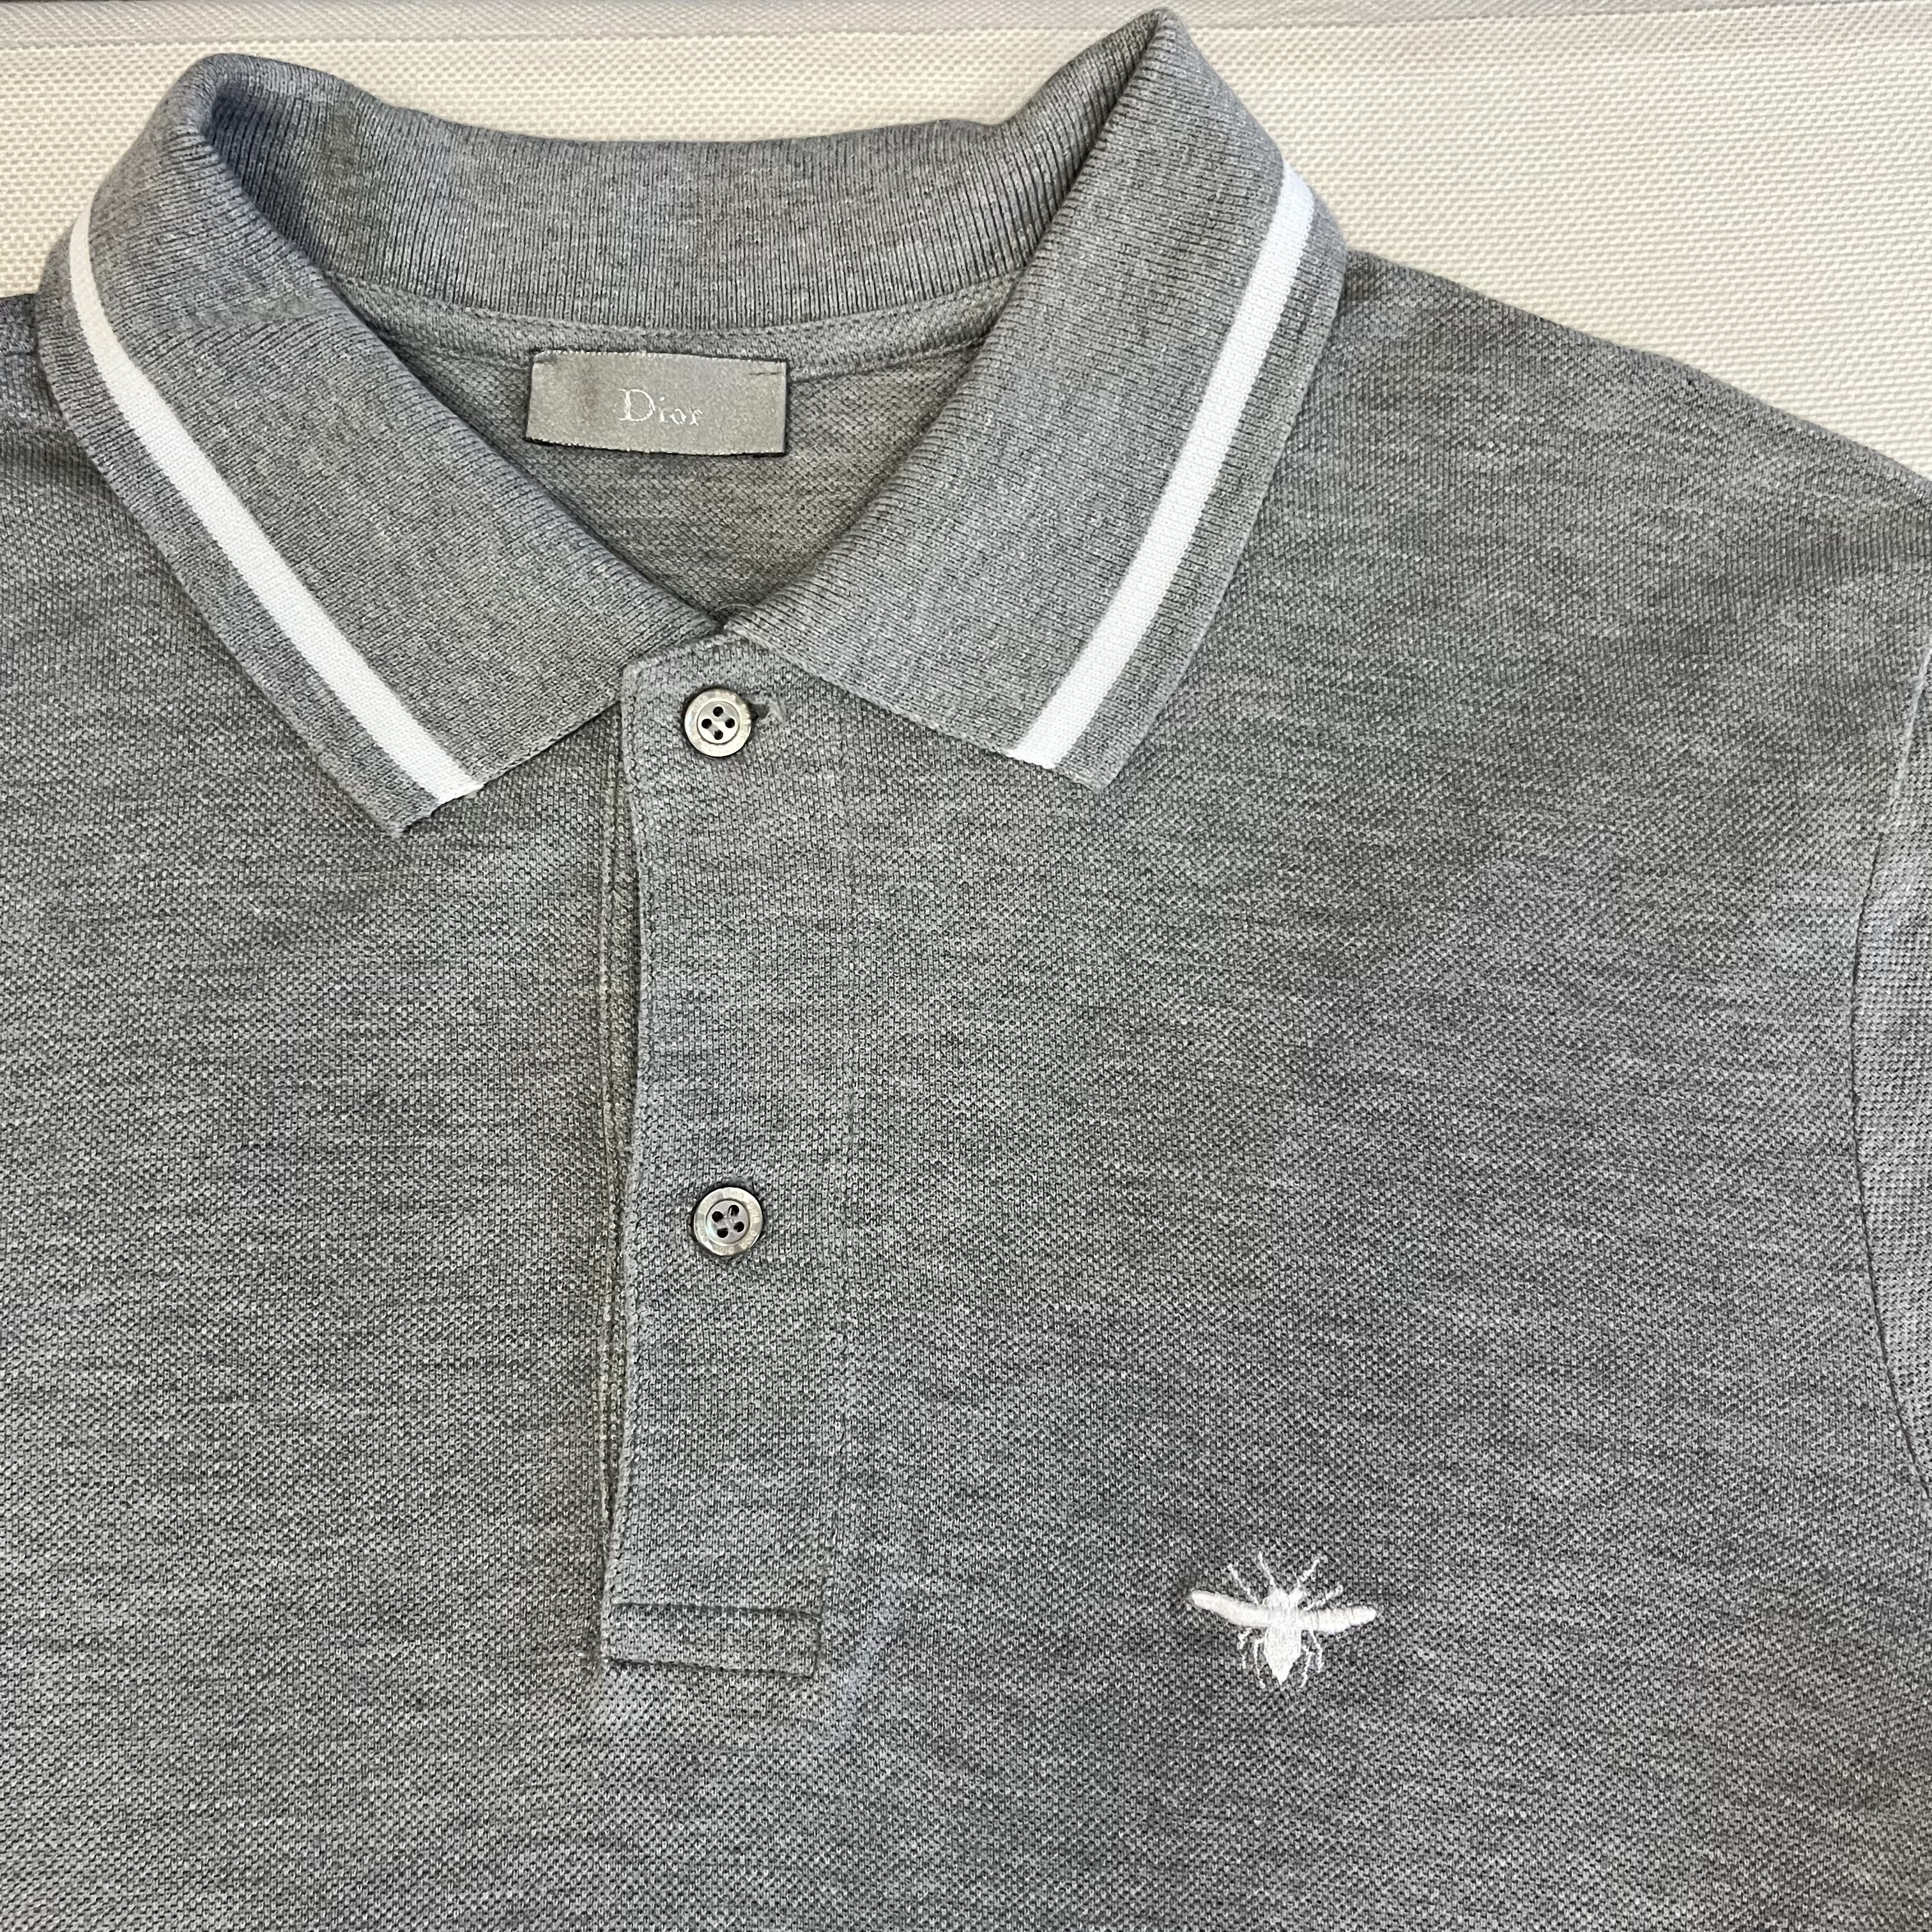 Dior Grey White Bee Embroidery Polo T-Shirt S Dior